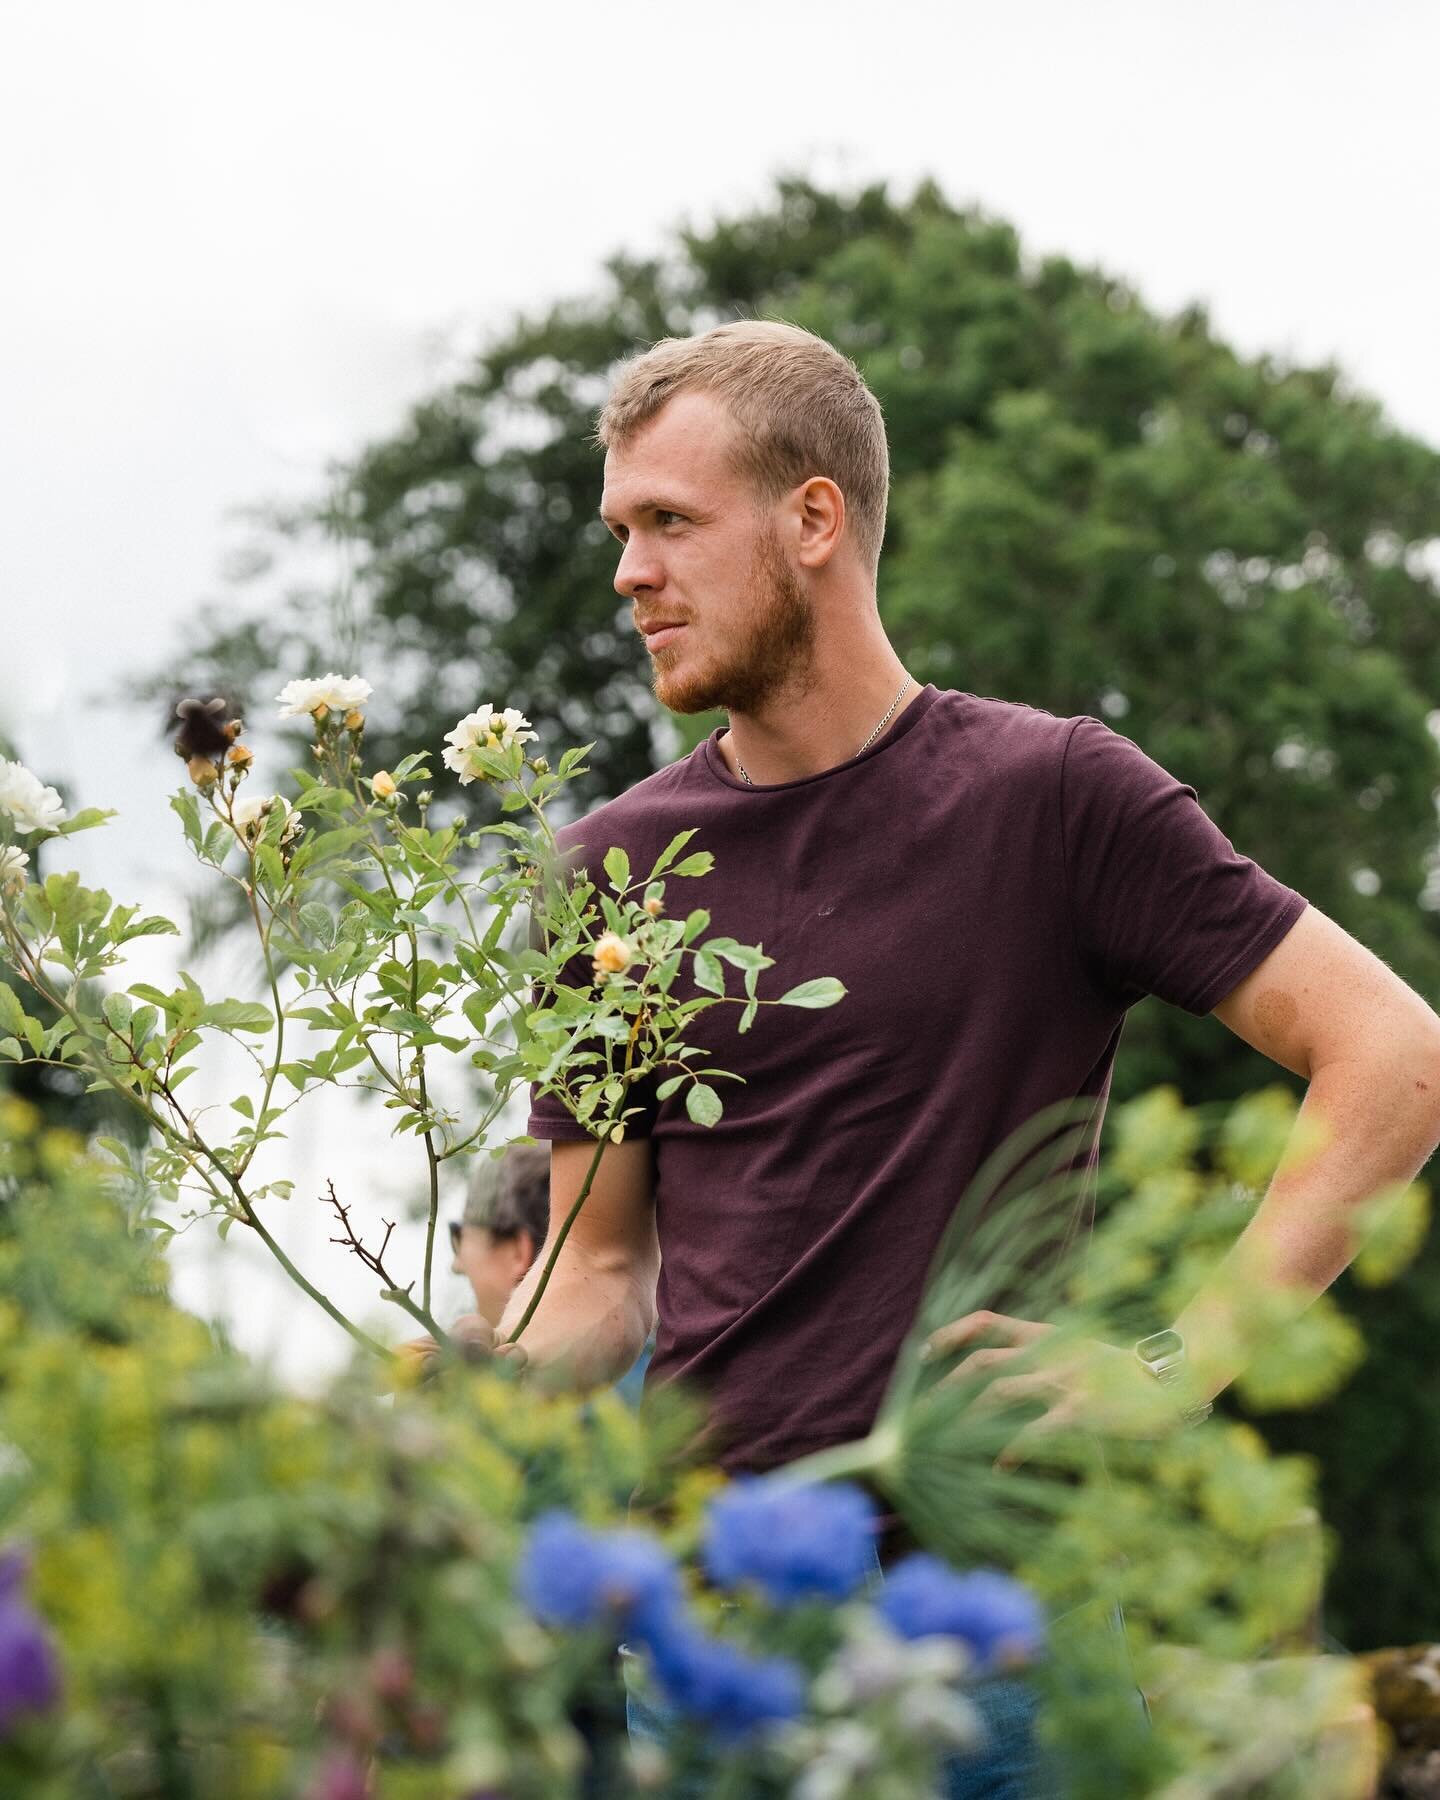 This is me! I&rsquo;m John. I decided I&rsquo;d better show my face😂 This first one was snapped a couple of years ago by @wild_meadow without me knowing&hellip;(natural poser!🤣) The second, a daft one I took with one of my favourite flowers. I run 